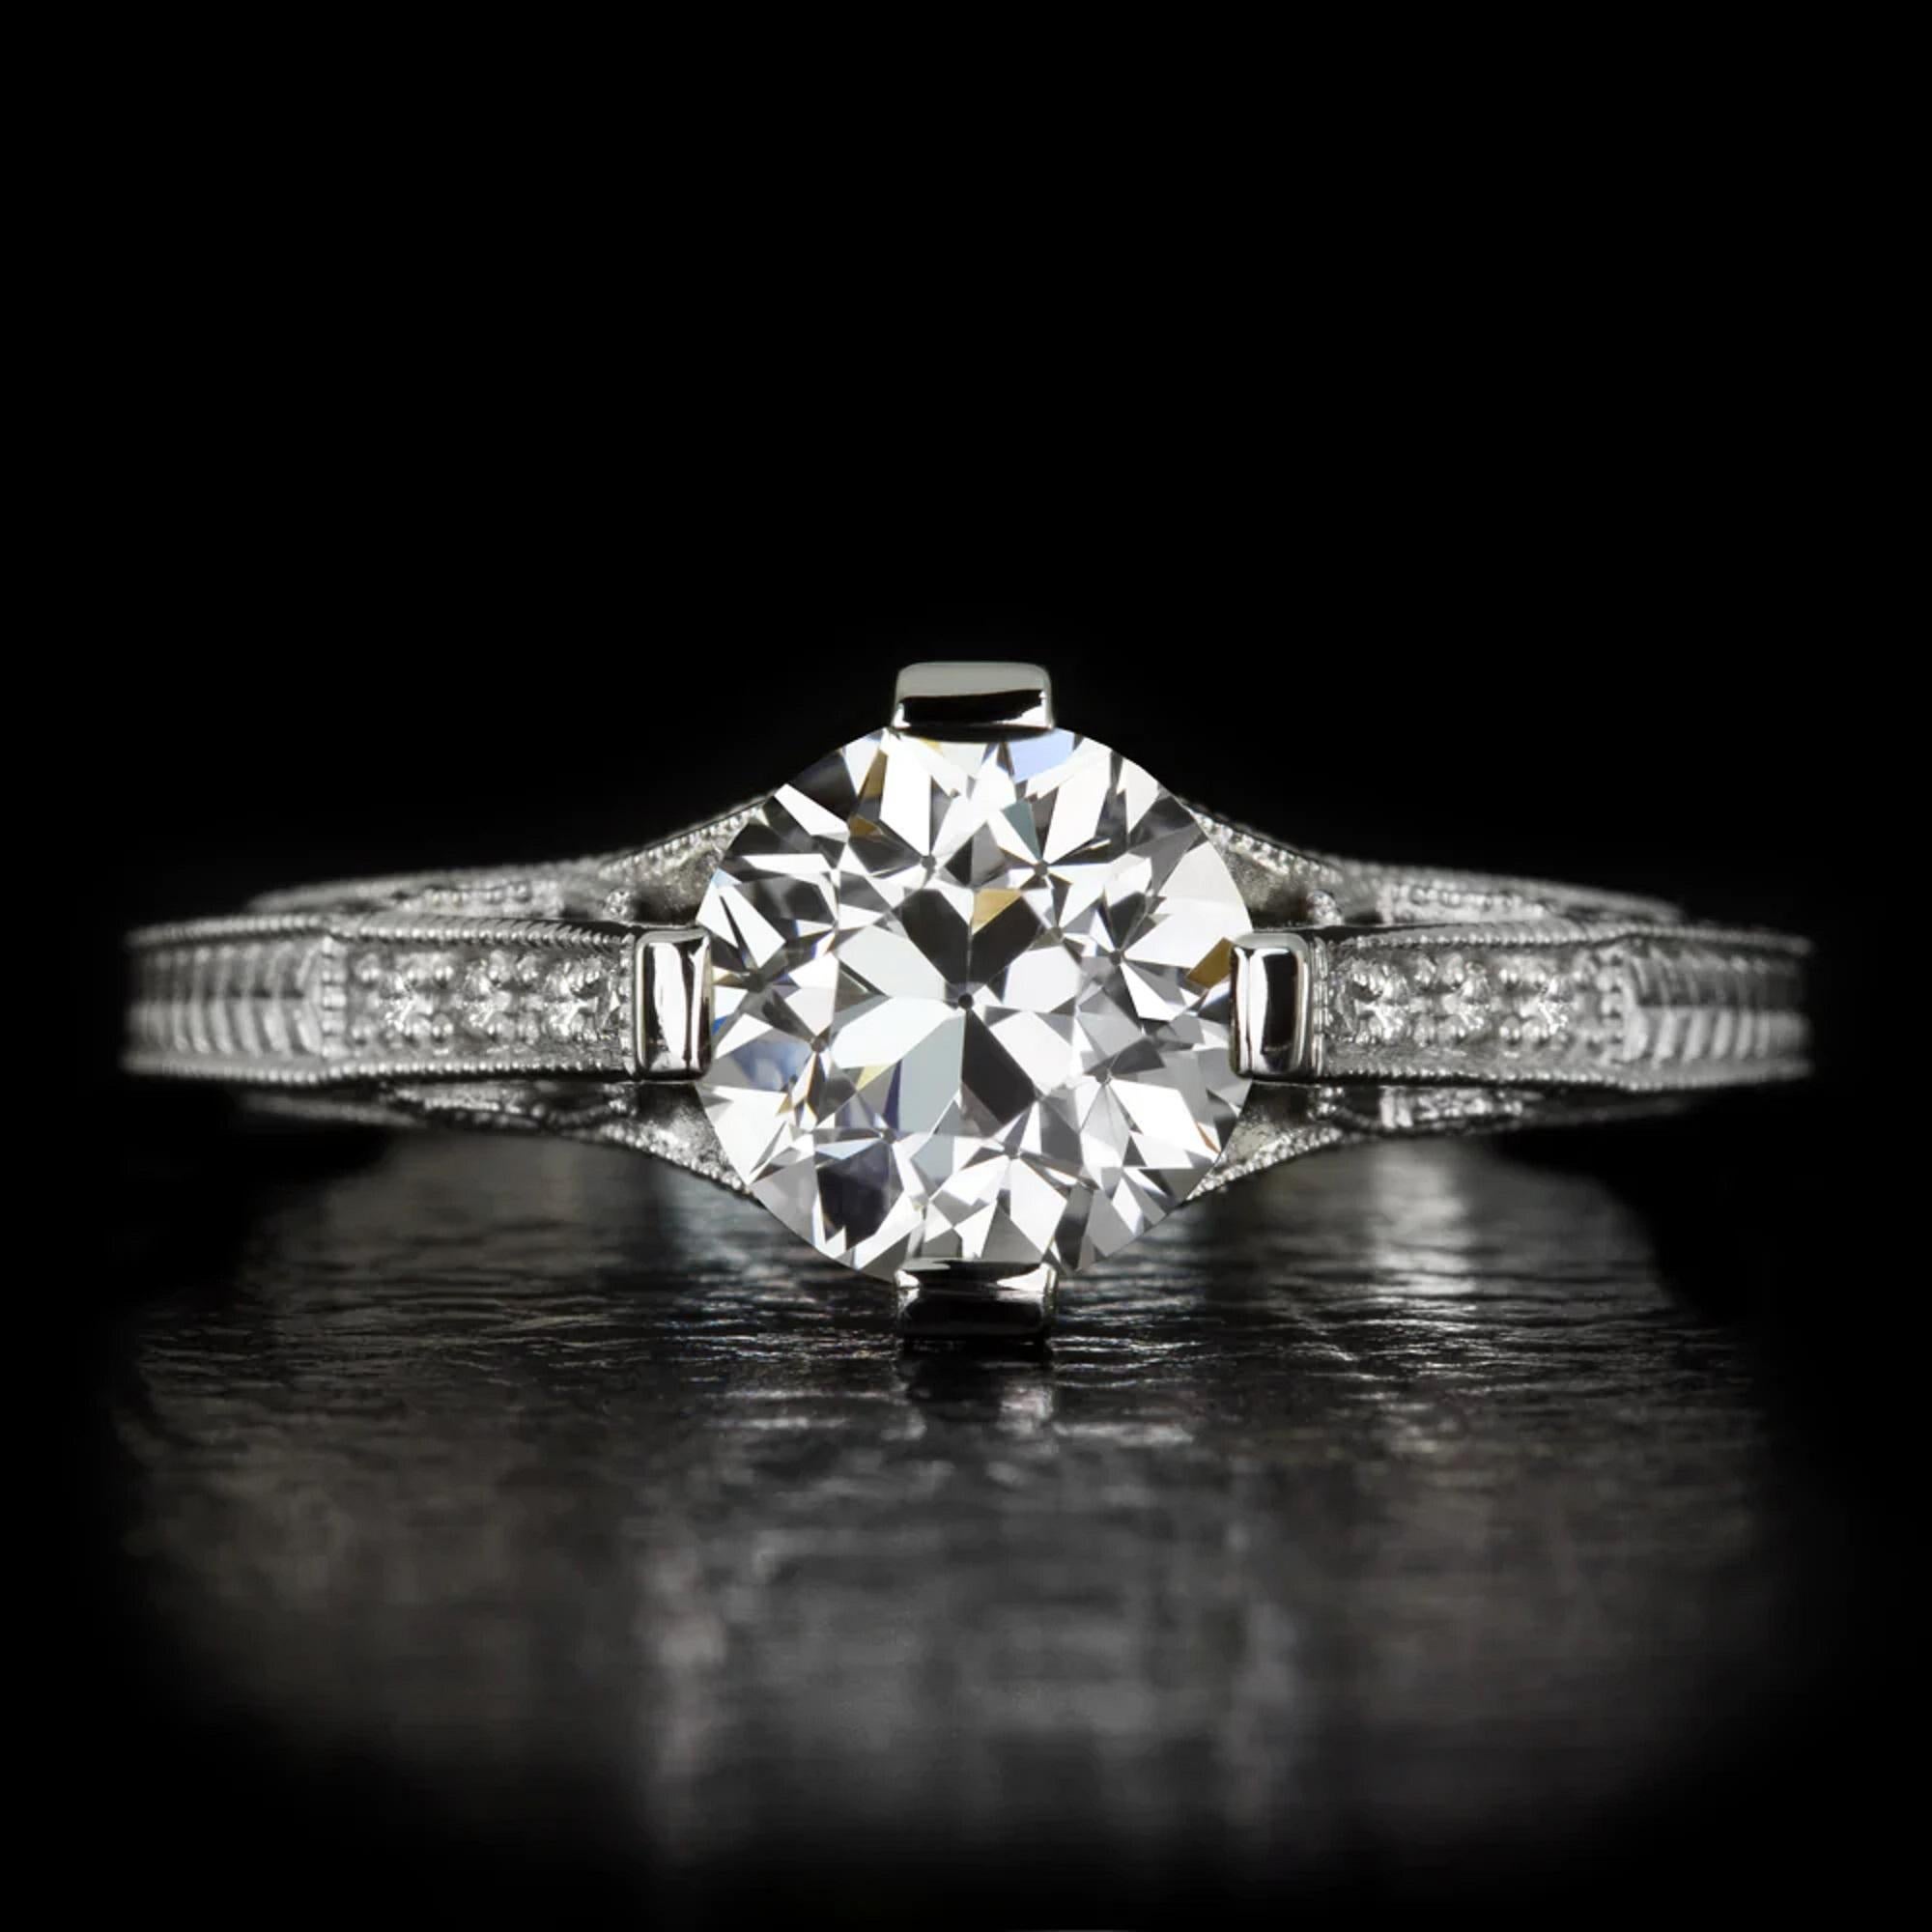 Elegant and full of brilliant sparkle, this vintage style engagement ring’s classic design is crowned by a stunning GIA certified old European cut diamond. The beautifully white and exceptionally clean 0.89ct diamond displays dazzlingly bright